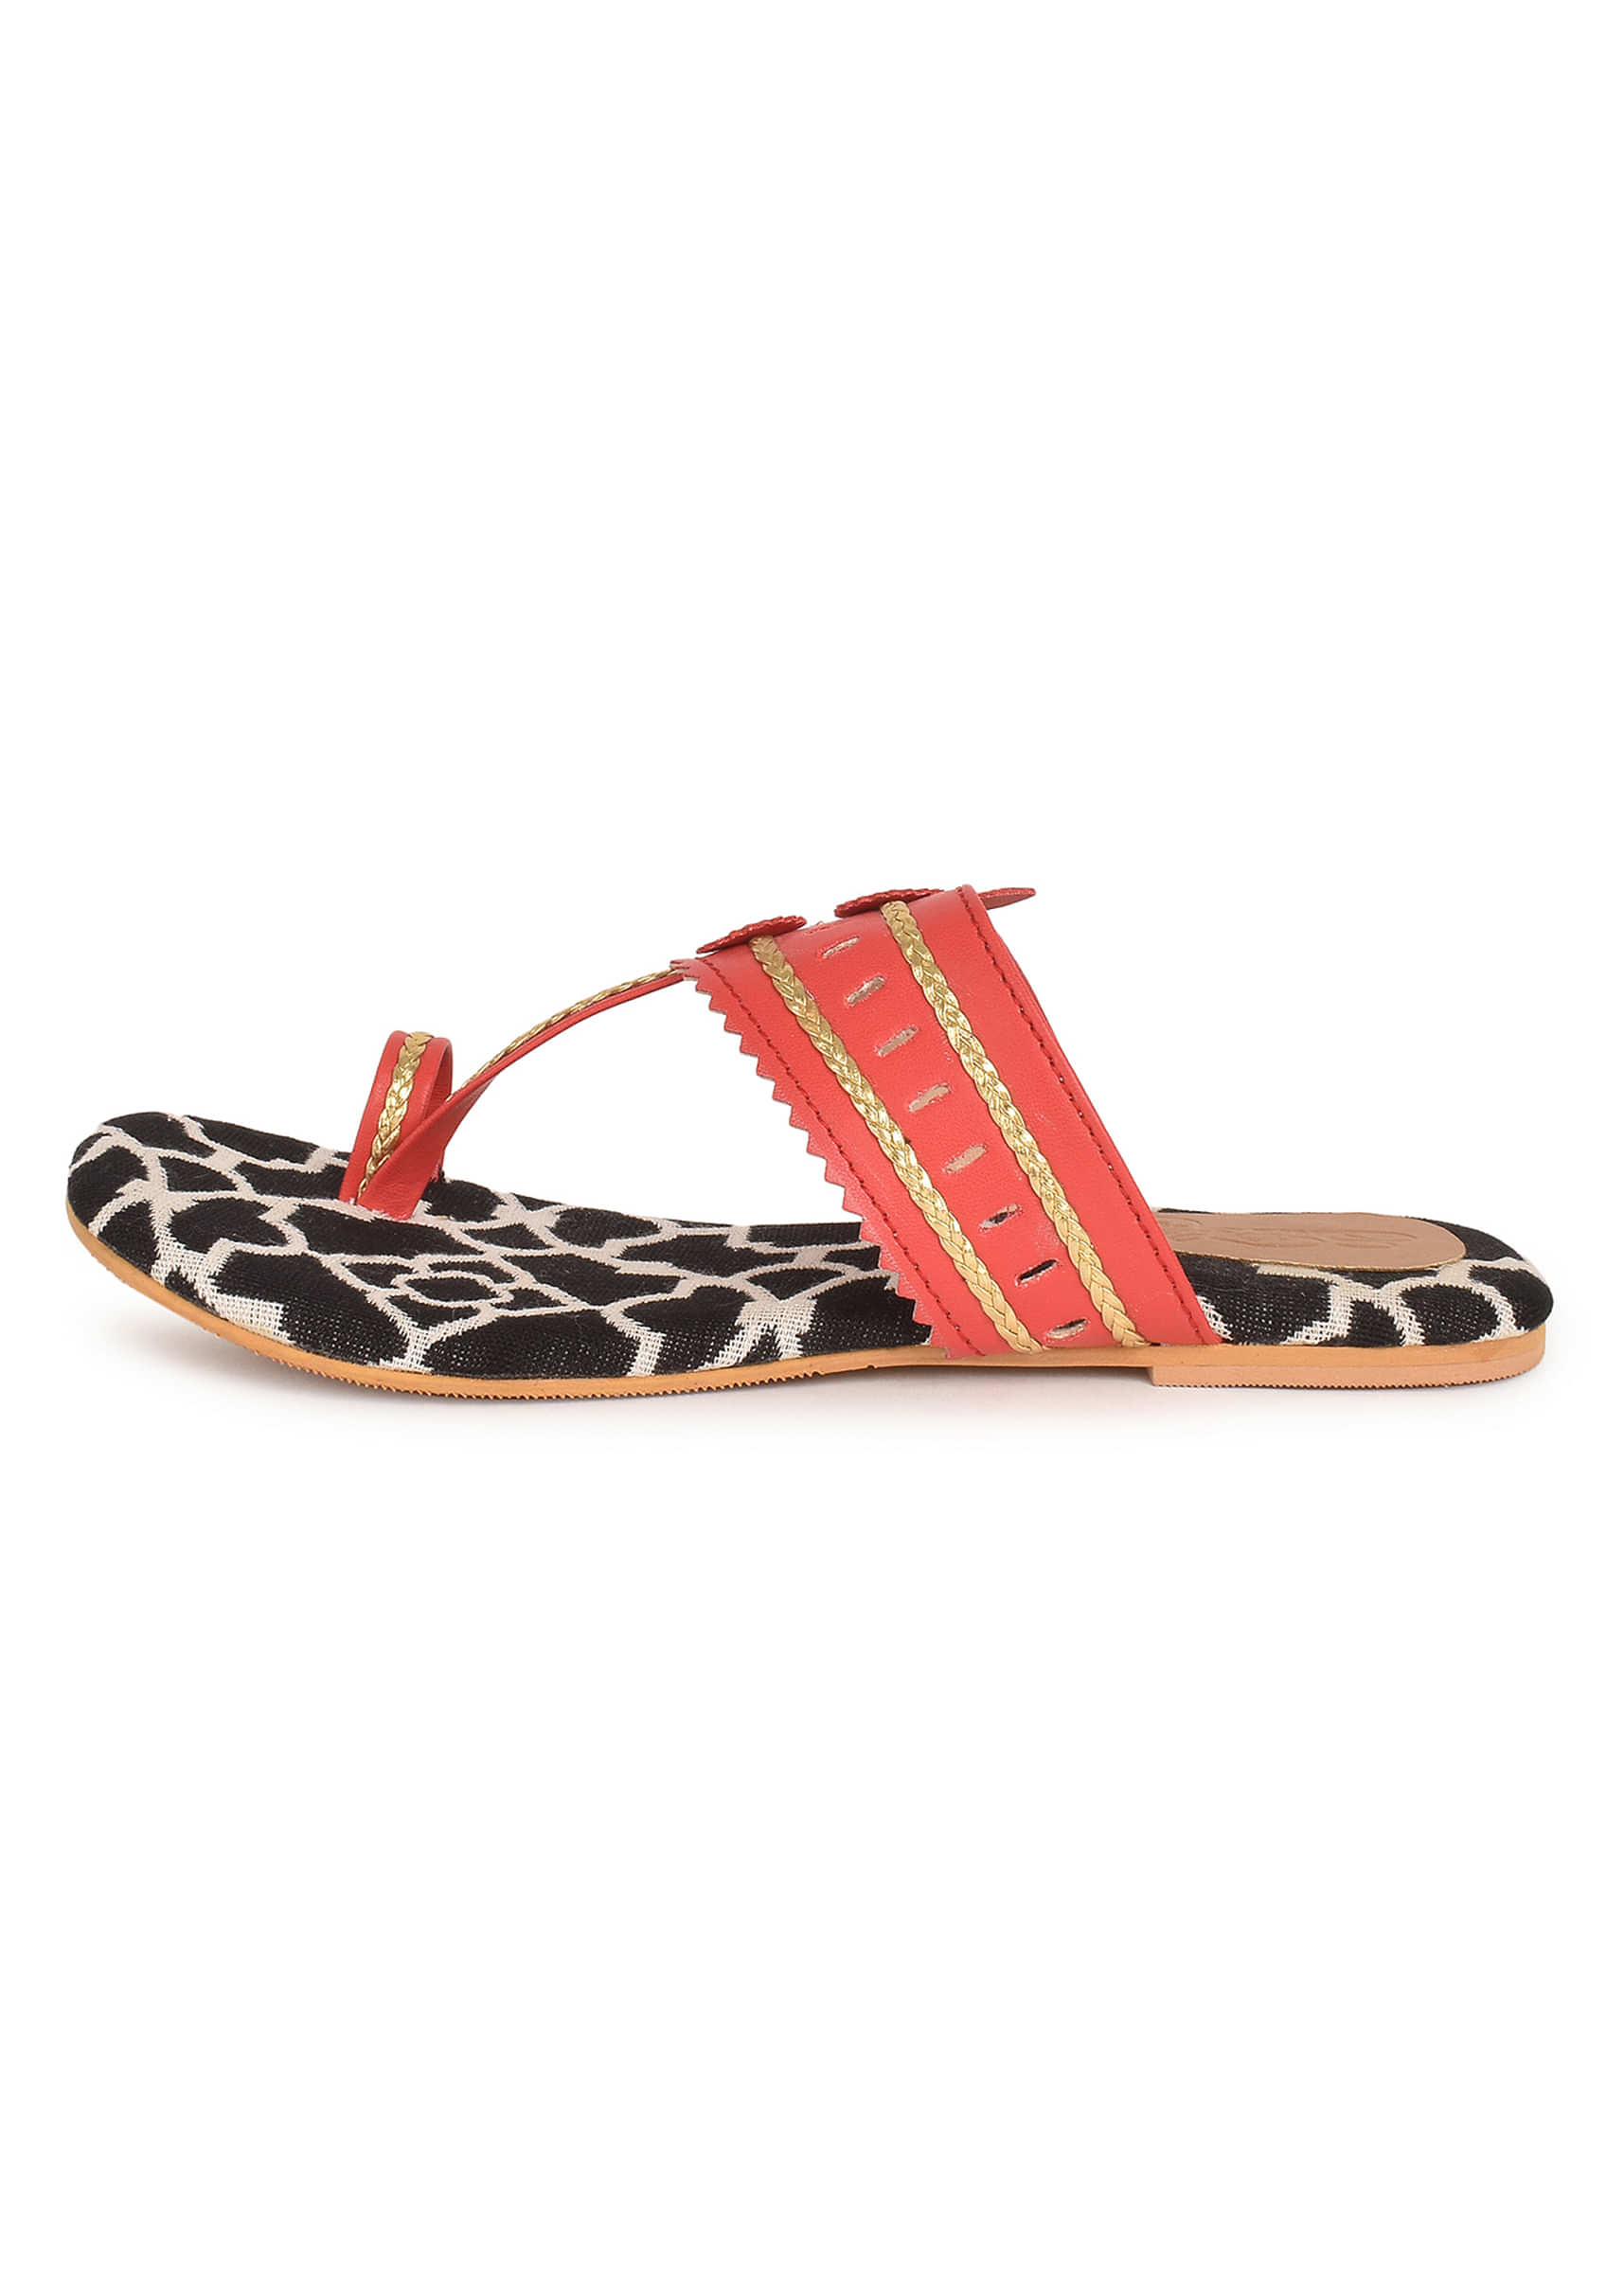 Red Kolhapuri Flats With Black And White Jacquard Sole By Sole House